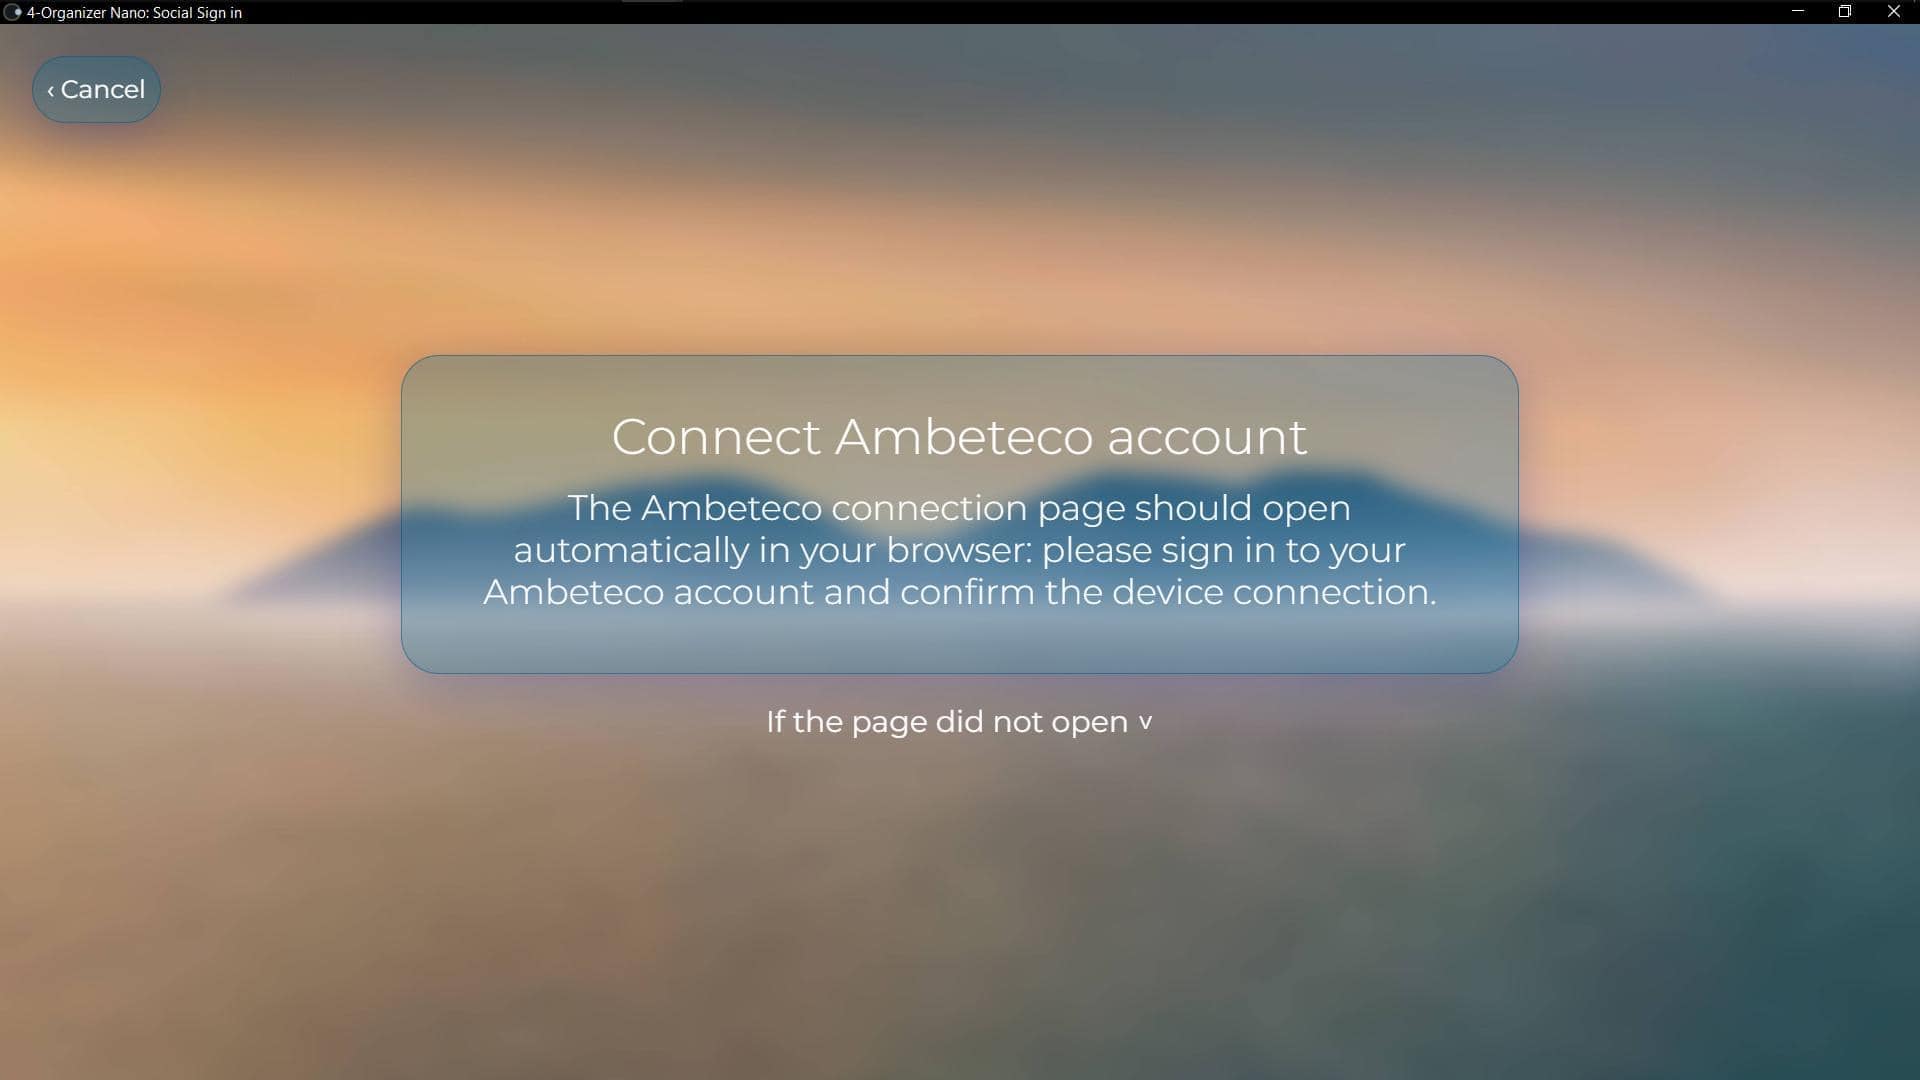 Screenshot that shows how does the Ambeteco Connect work in 4-Organizer Nano